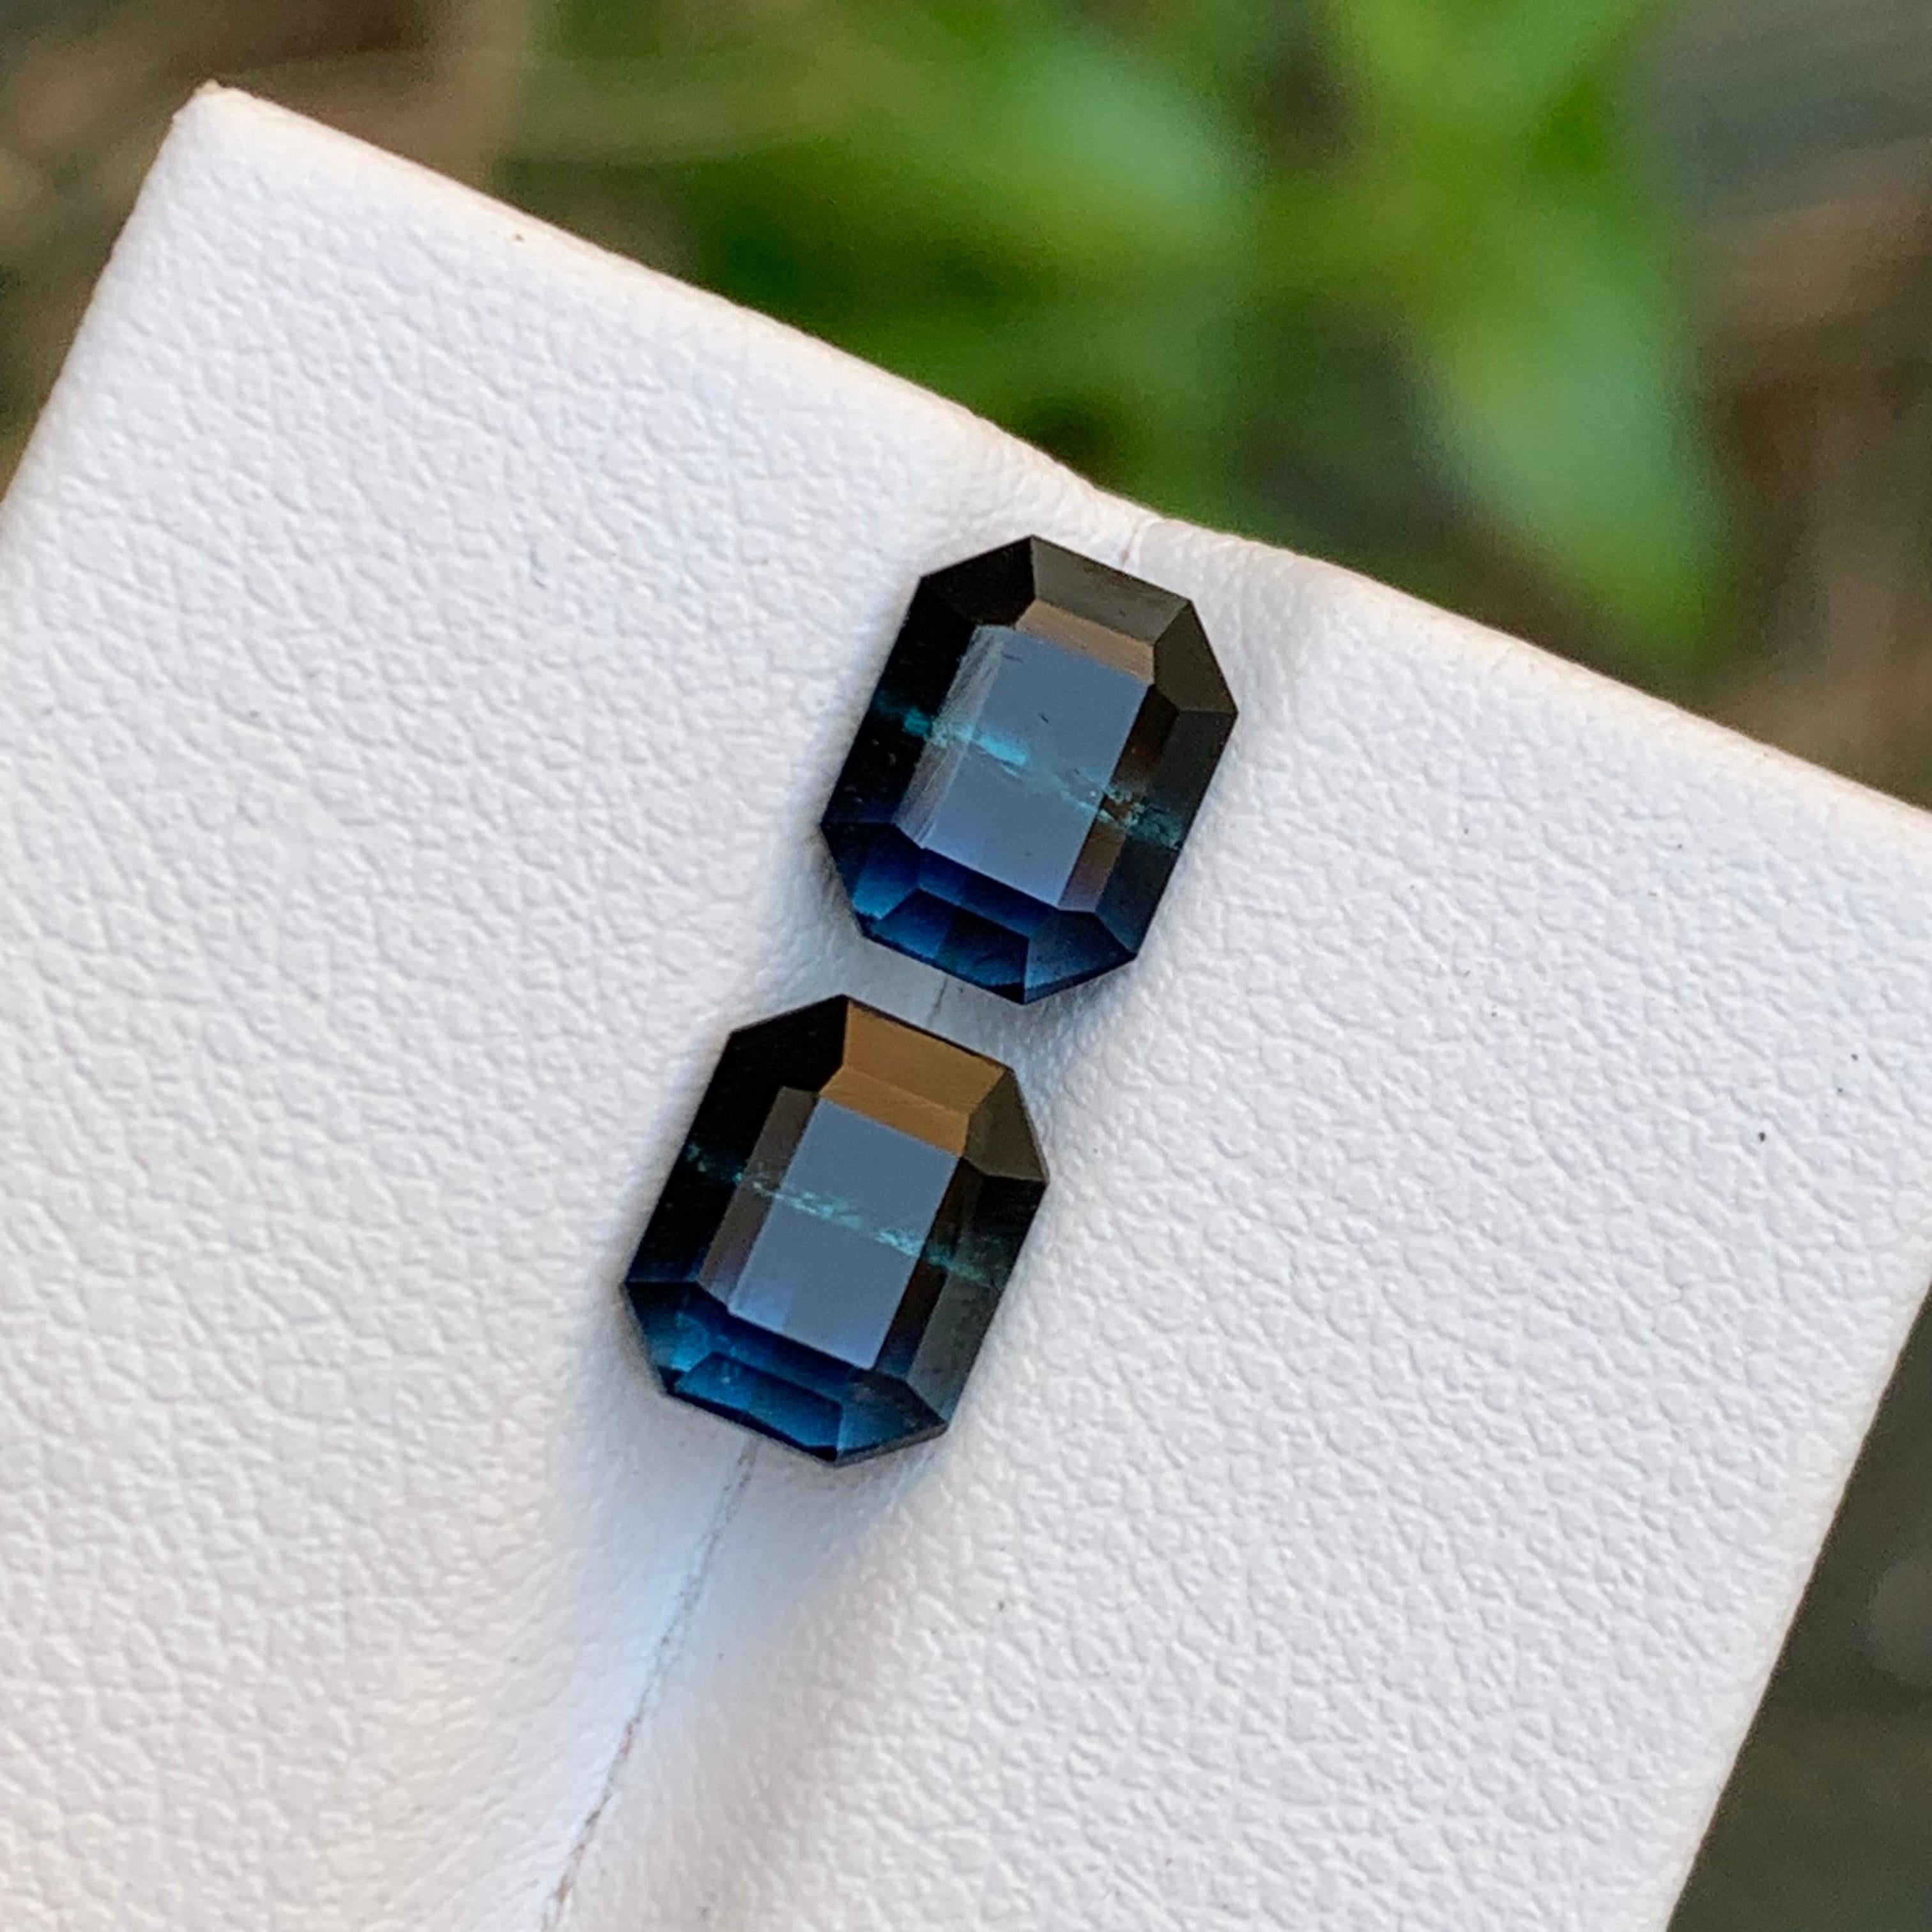 GEMSTONE TYPE: Tourmaline
PIECE(S): Pair
WEIGHT: 3.70 Carats
SHAPE: Emerald
SIZE (MM): 
1.85 Carat: 7.63 x 6.08 x 4.75
1.85 Carat: 7.56 x 6.18 x 4.96
COLOR: Bicolor Blue and Black
CLARITY: Slightly Included 
TREATMENT: None
ORIGIN: